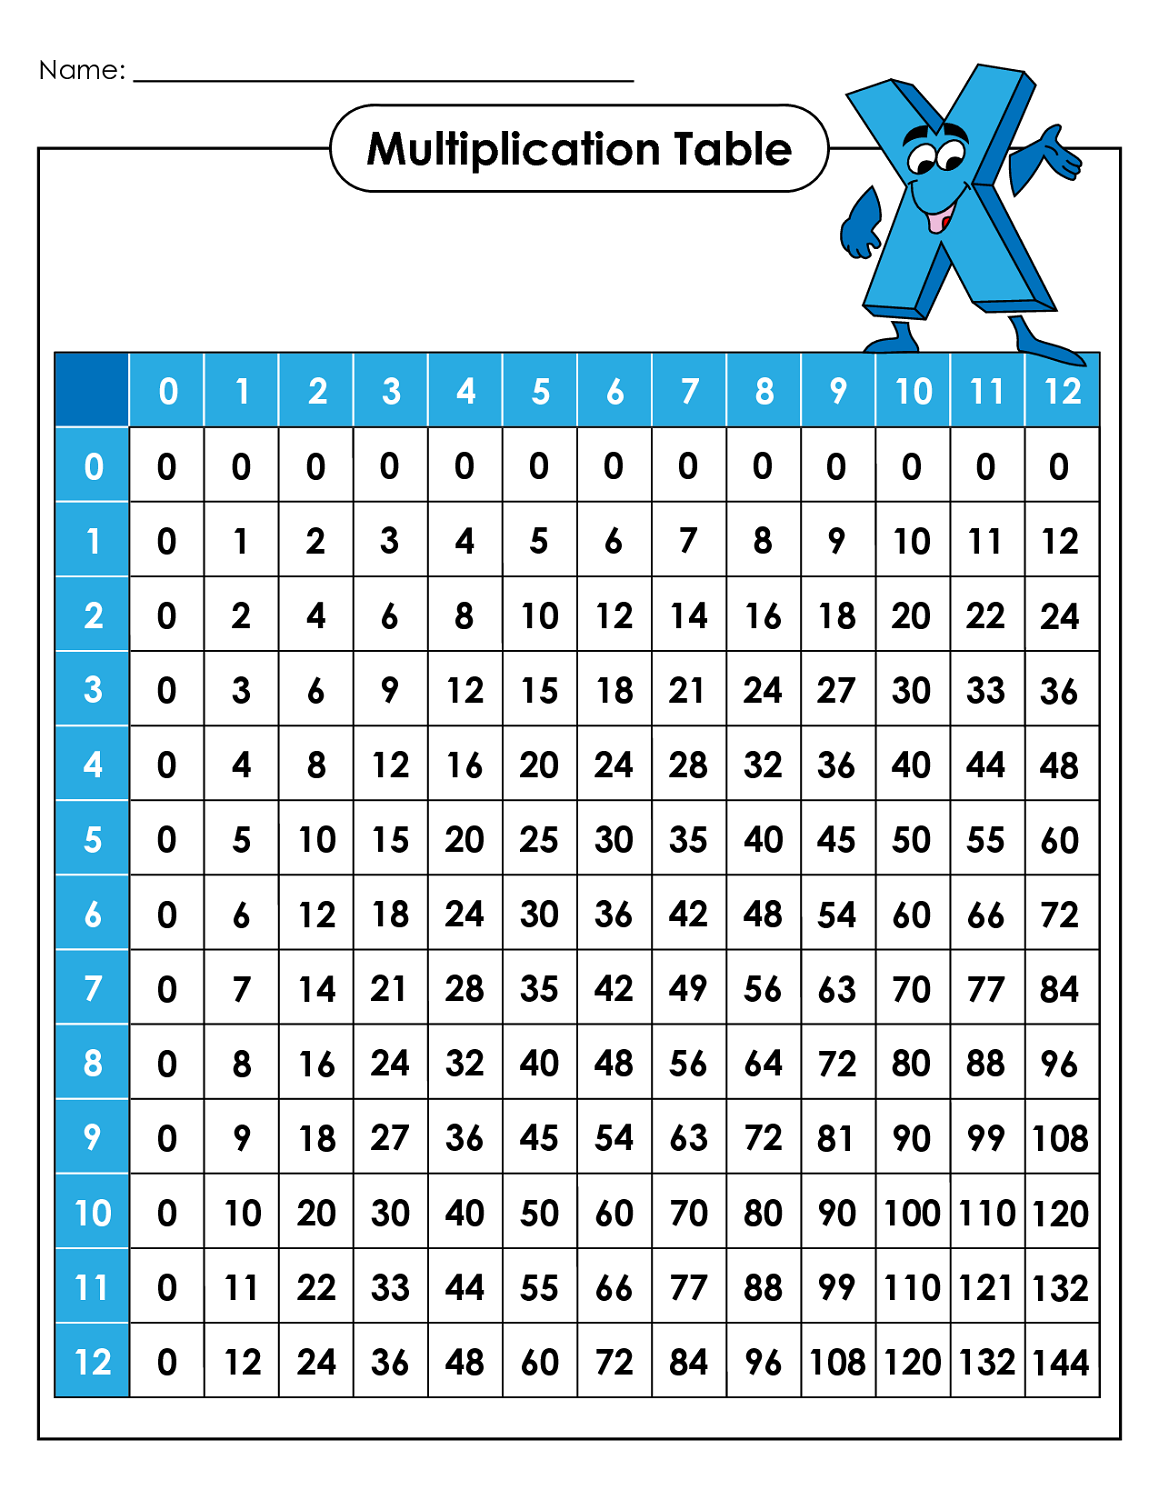 multiply-chart-table-blue